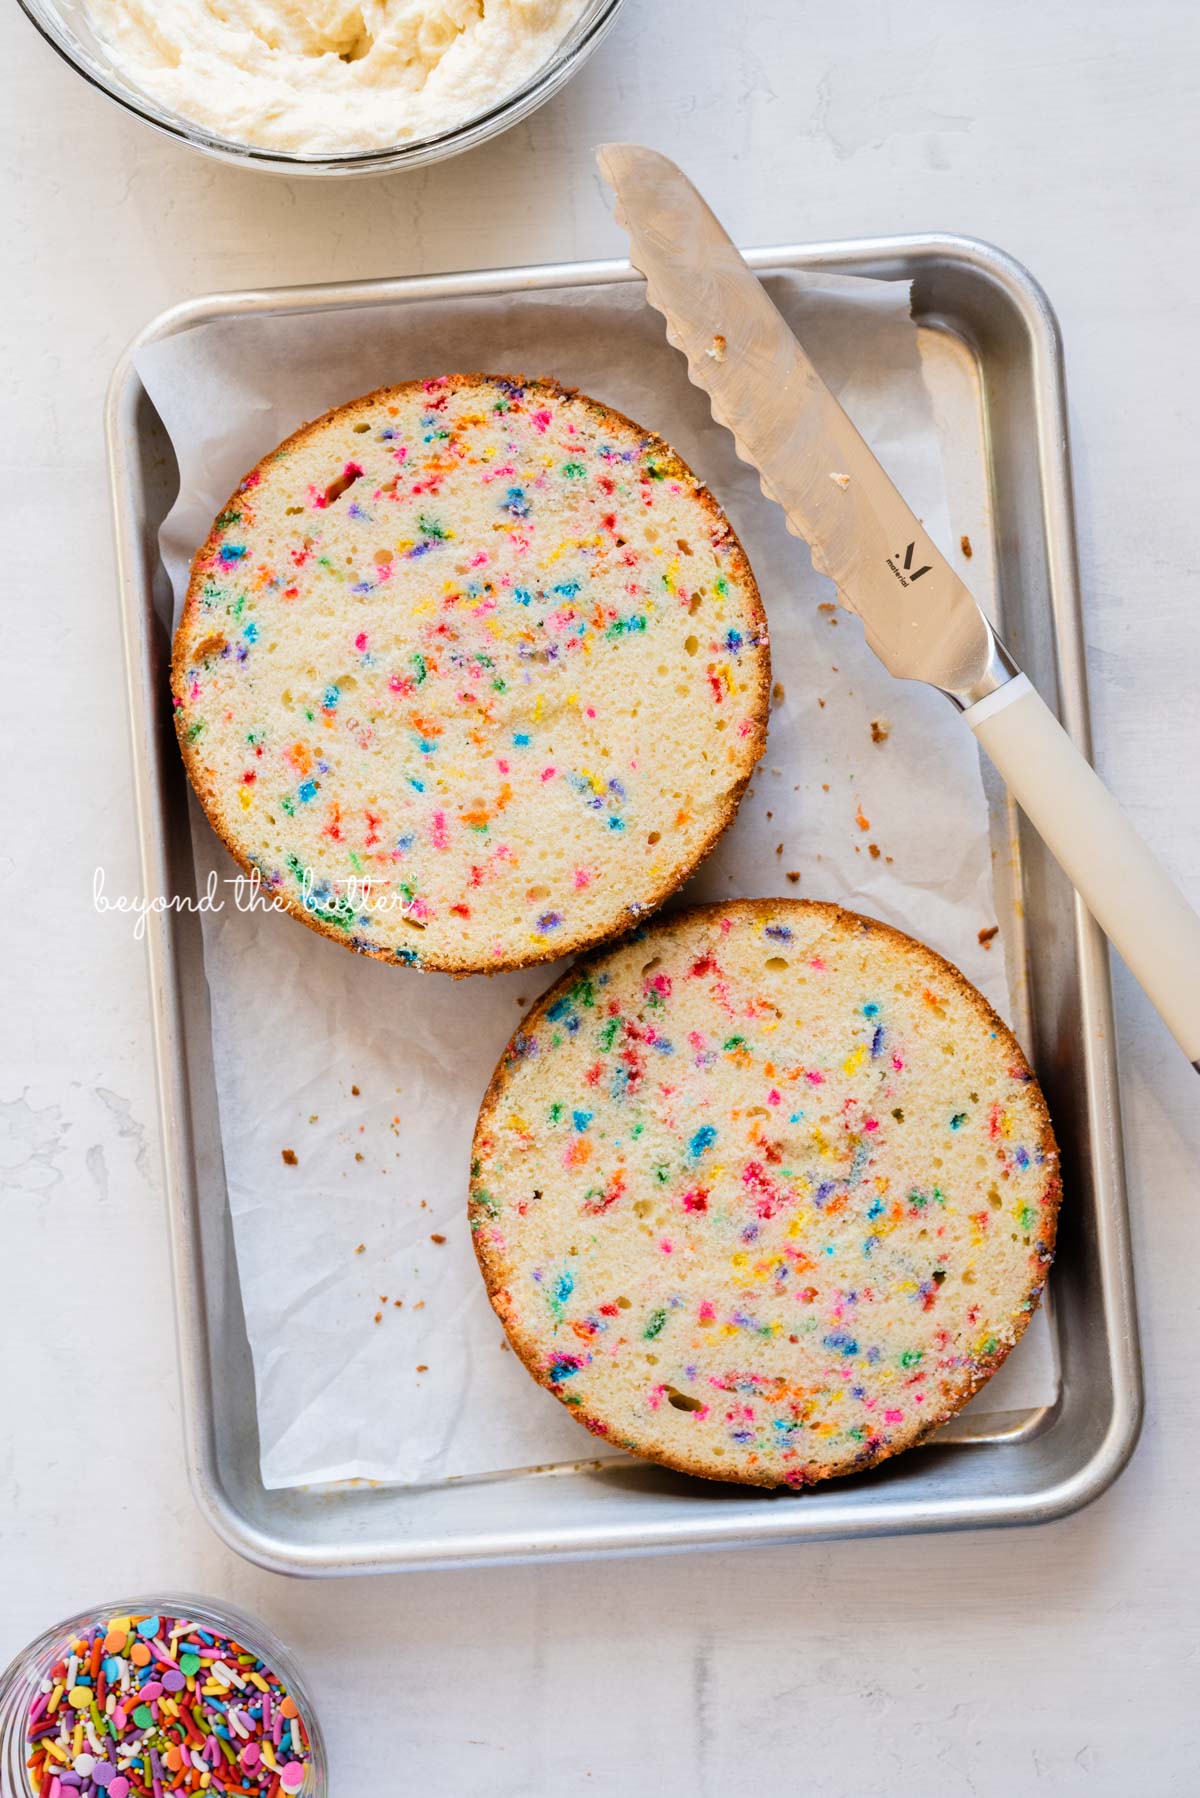 6 inch single layer funfetti cake sliced into two layers with a serrated knife from BeyondtheButter.com | All images © Beyond the Butter®